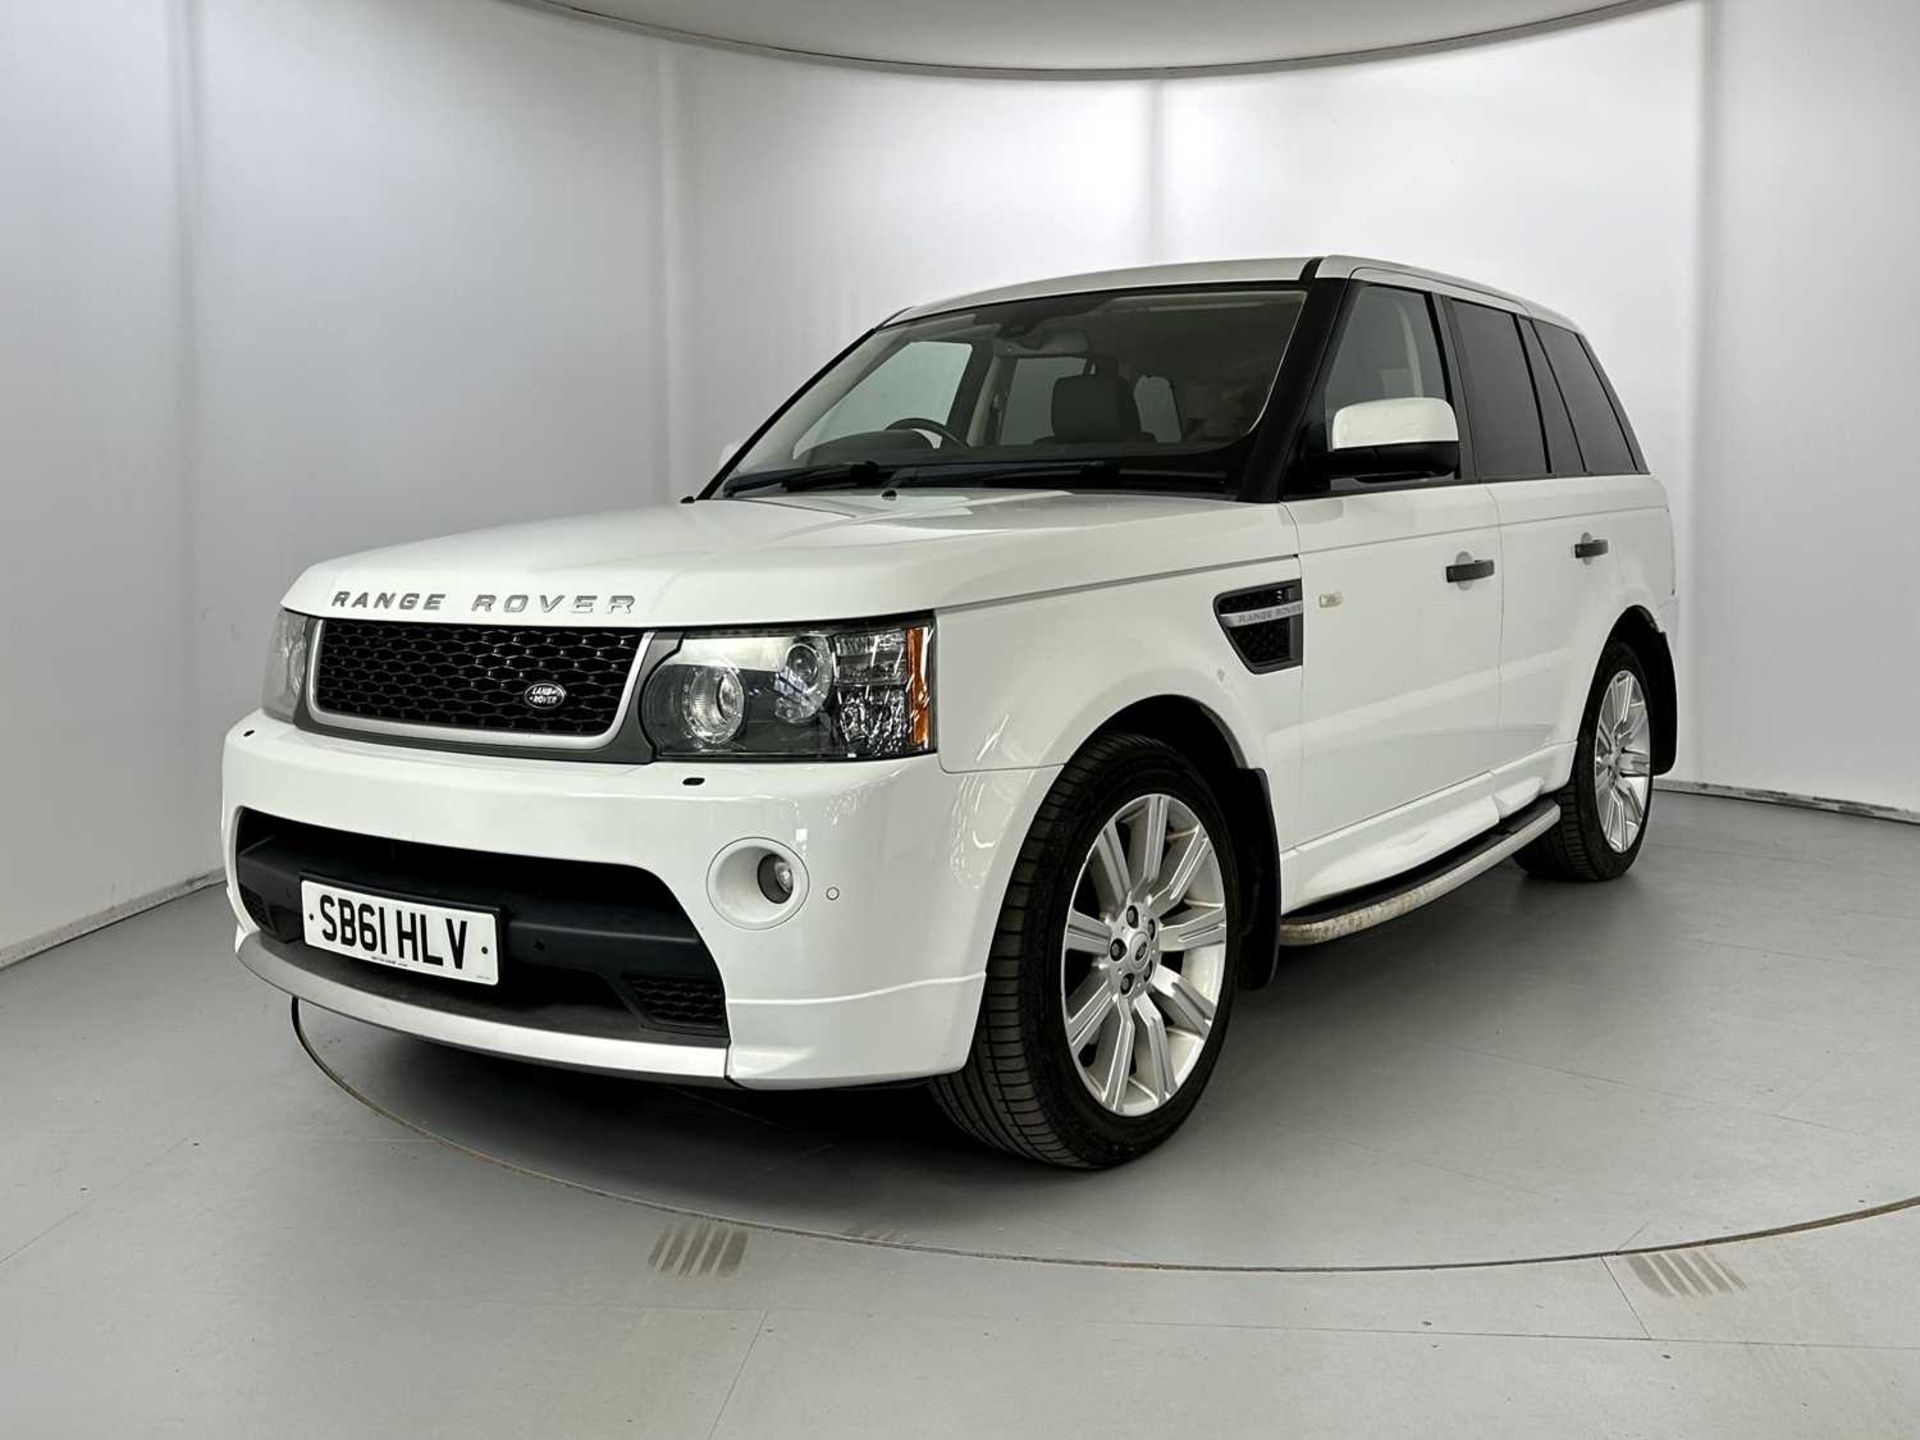 2011 Land Rover Range Rover Sport Stormer Edition  - Image 3 of 33